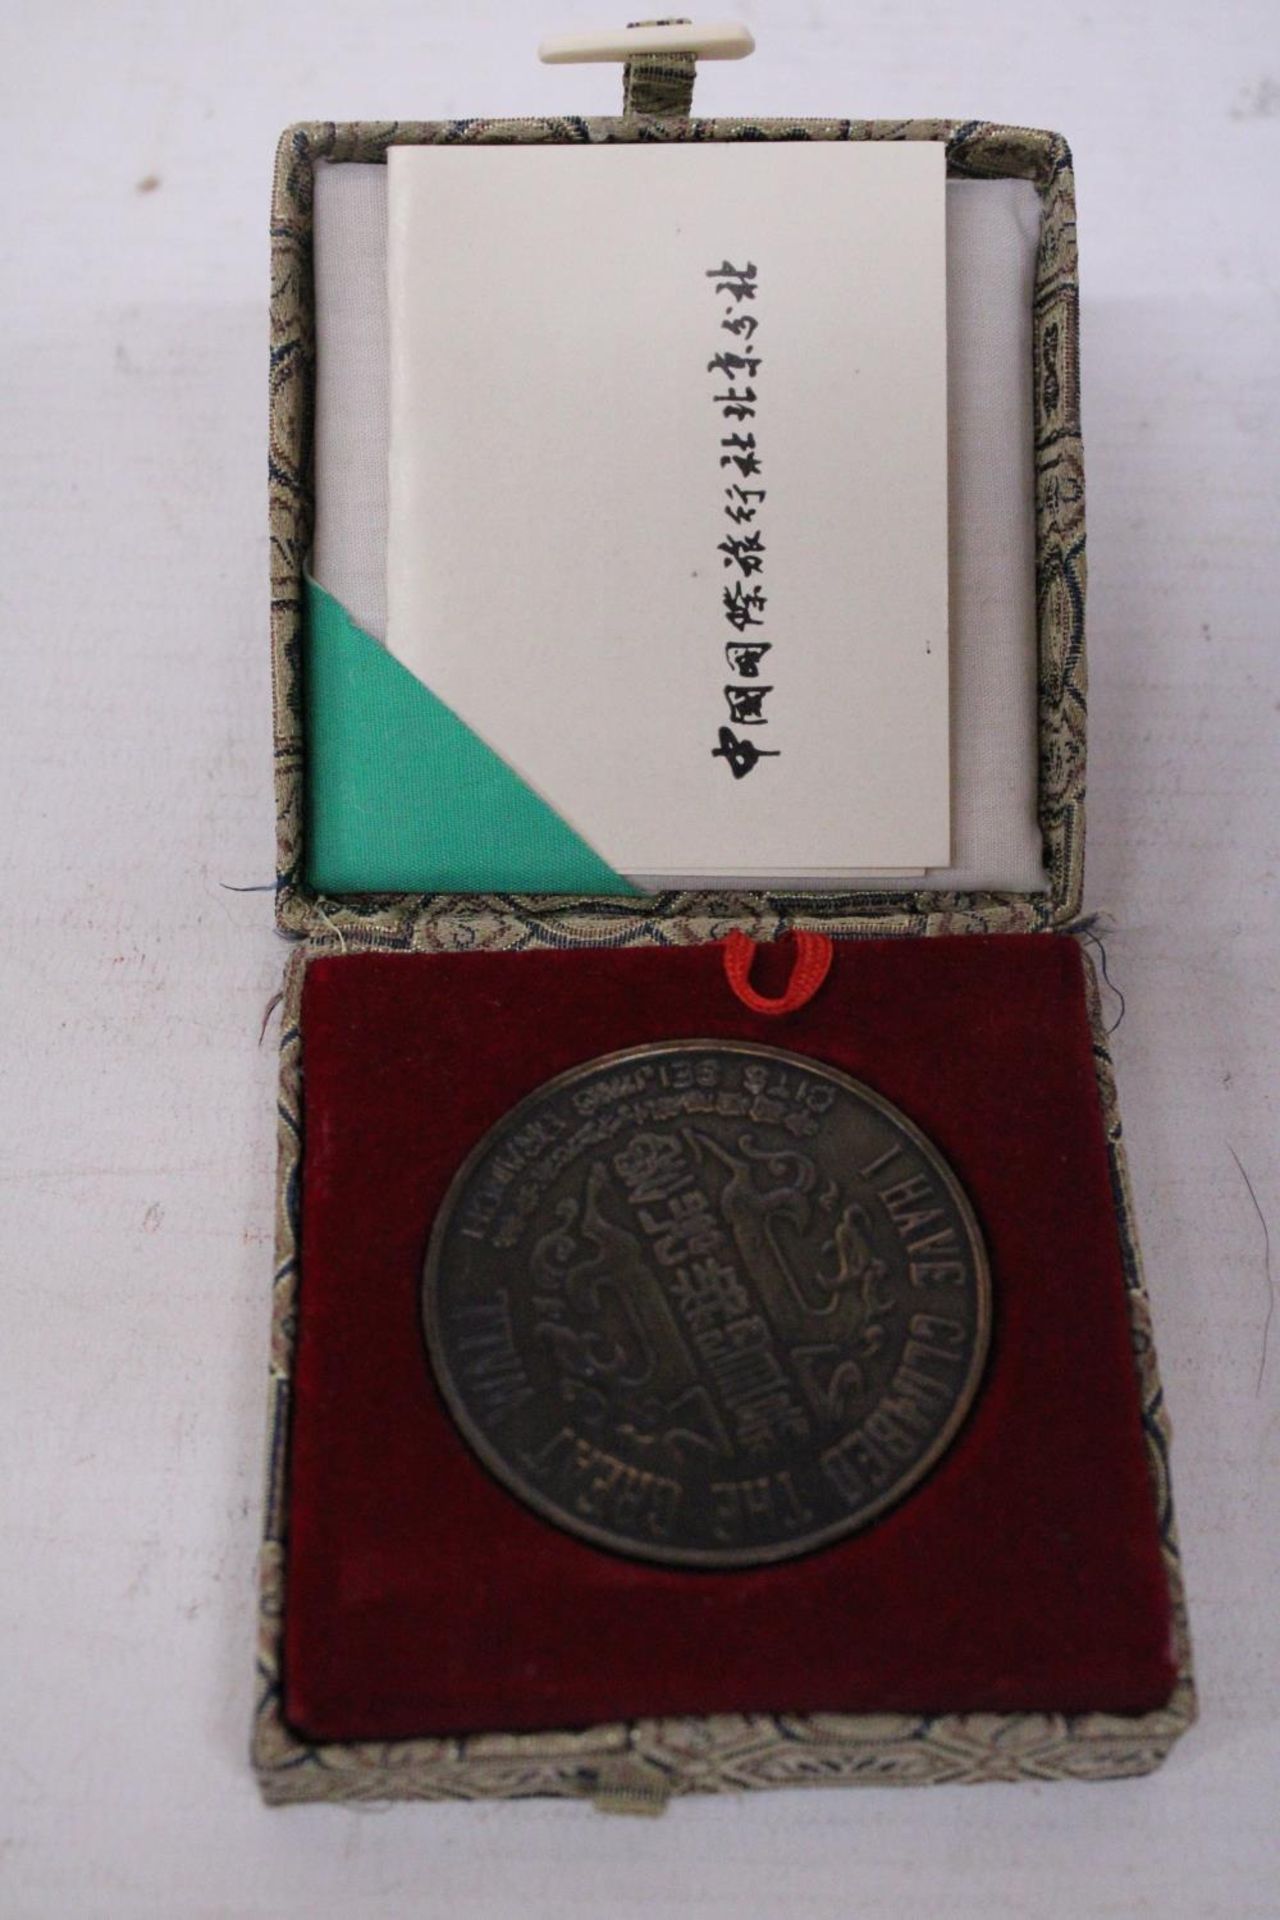 A BOXED BRONZE MEDAL "GREAT WALL OF CHINA" WITH A MINIATURE BUDDAH - Image 3 of 5